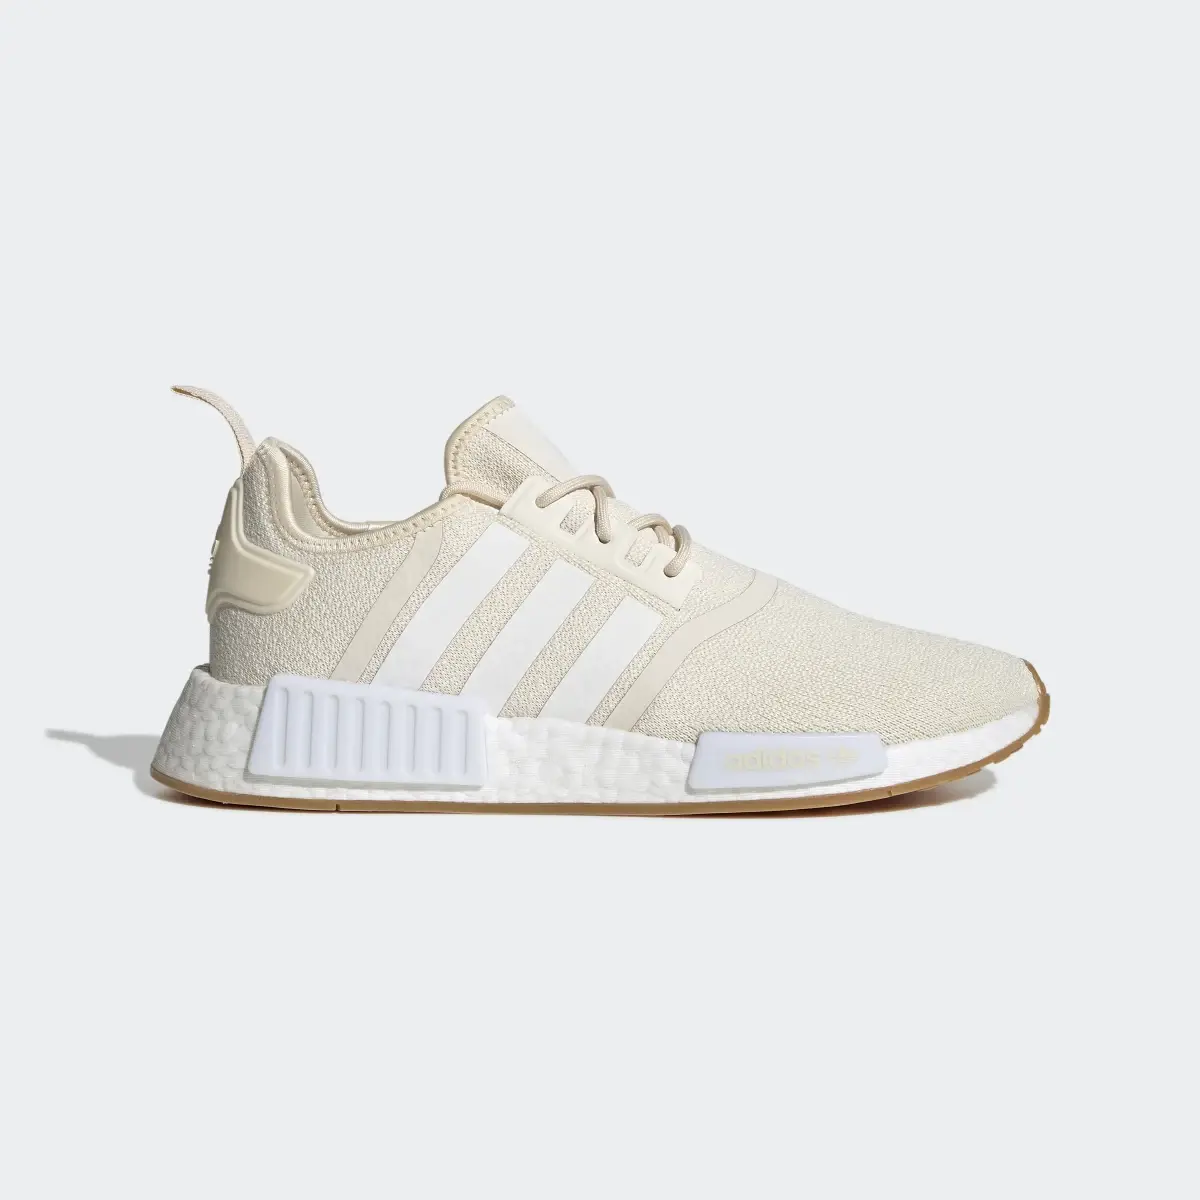 Adidas NMD_R1 Shoes. 2